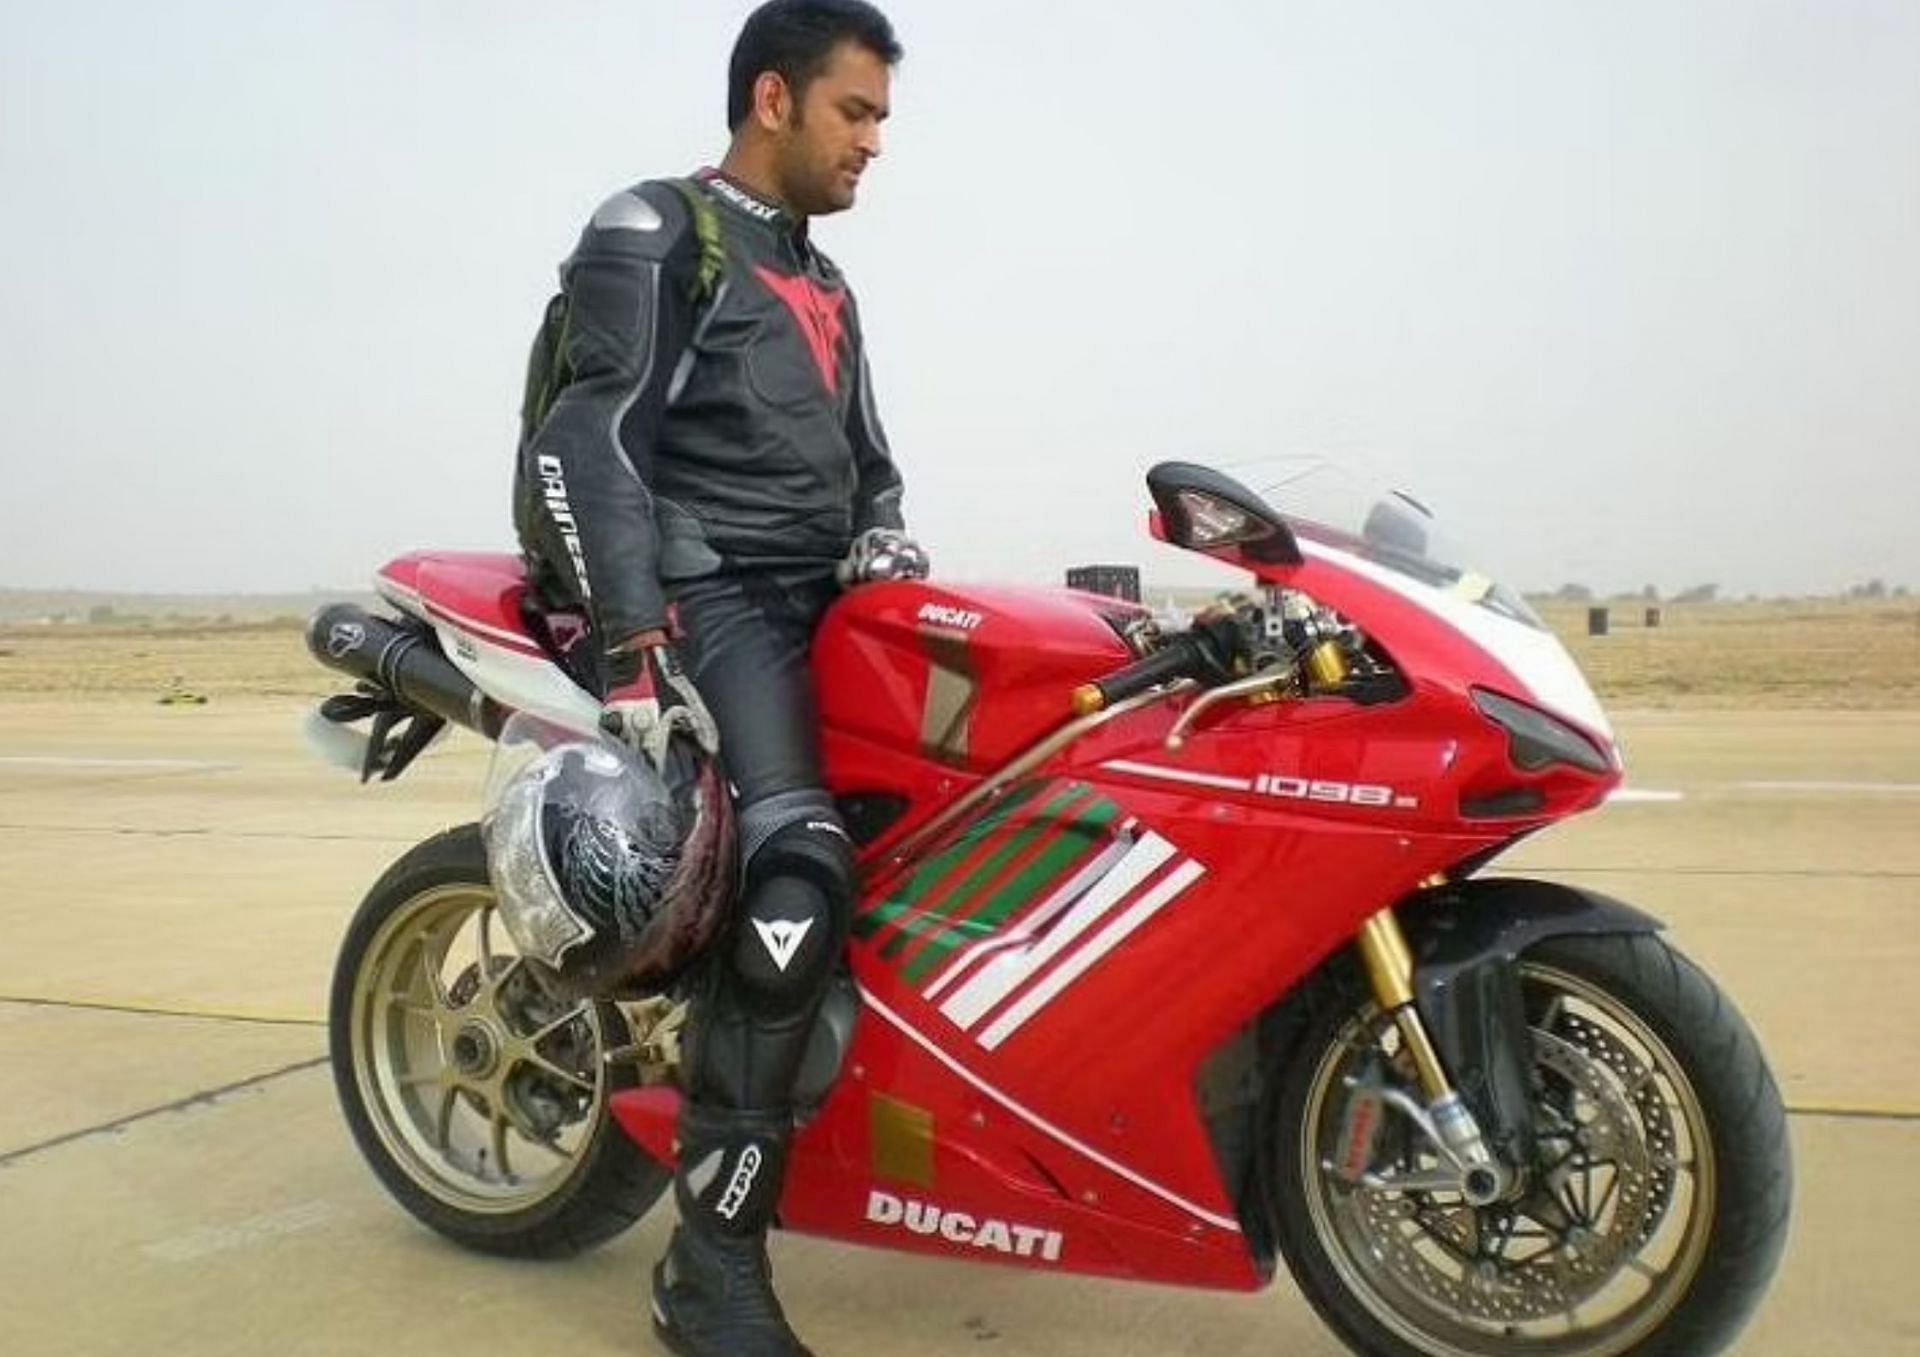 MS Dhoni with his Ducati 1098 (Picture Credits: Twitter).